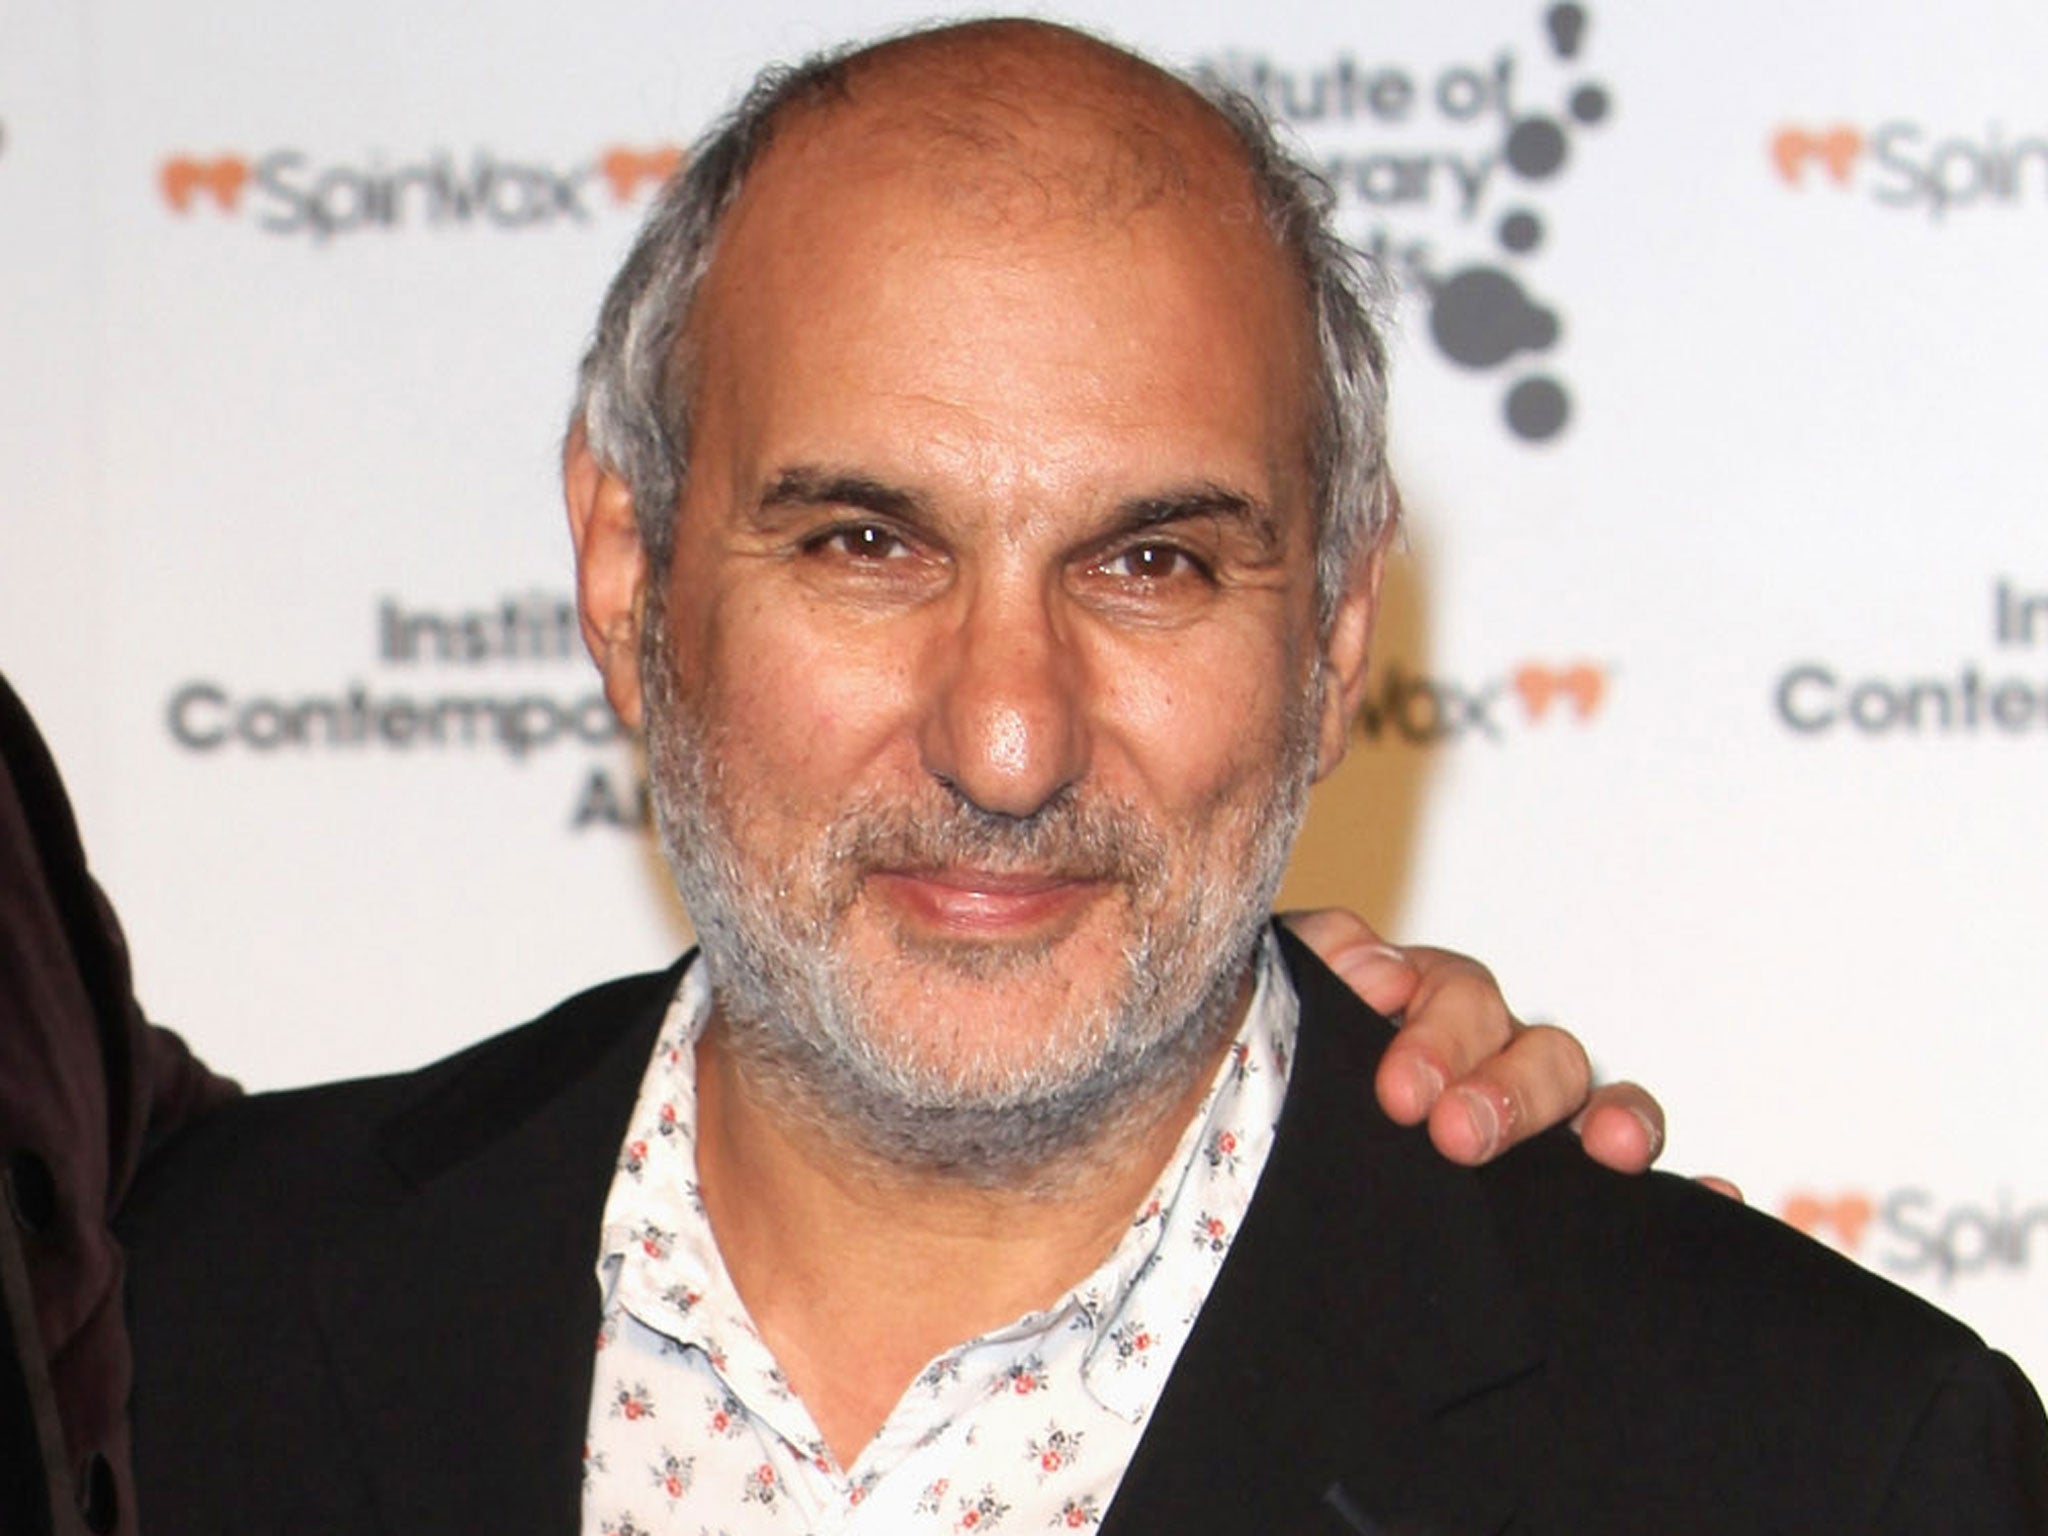 Alan Yentob recieves two salaries from the BBC, only one of which is publicly declared